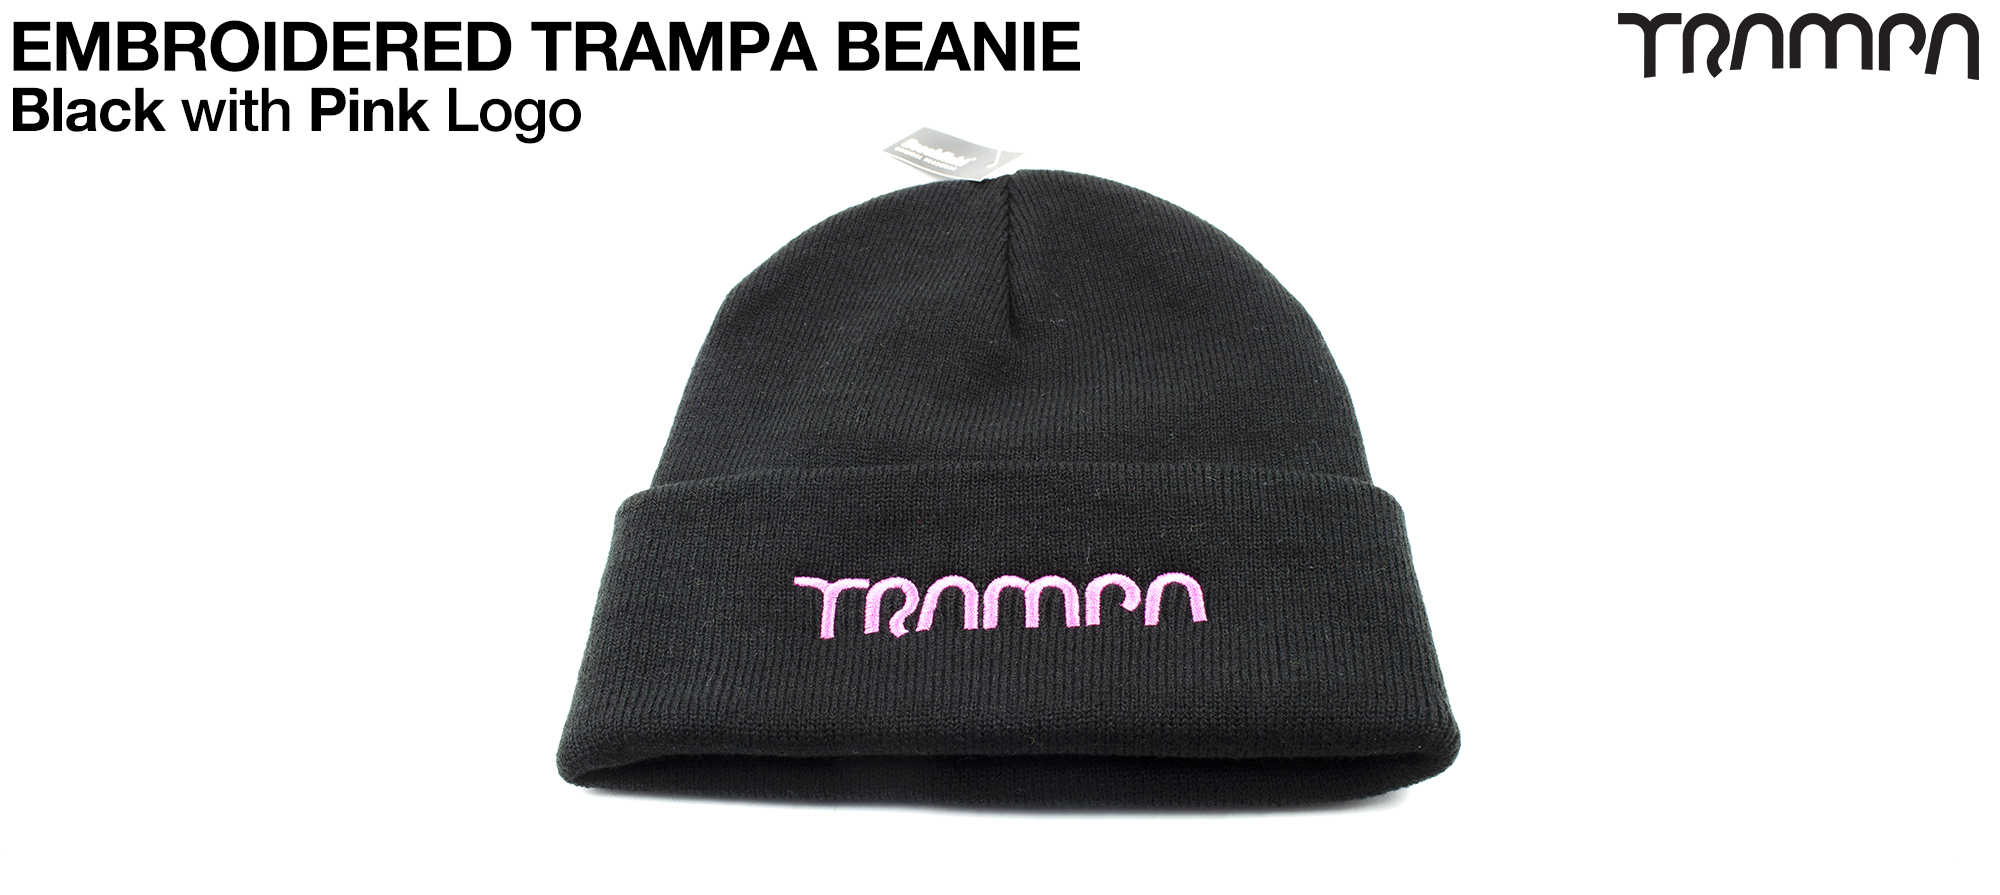 BLACK Woolie hat with PINK TRAMPA logo  - Double thick turn over for extra warmth 